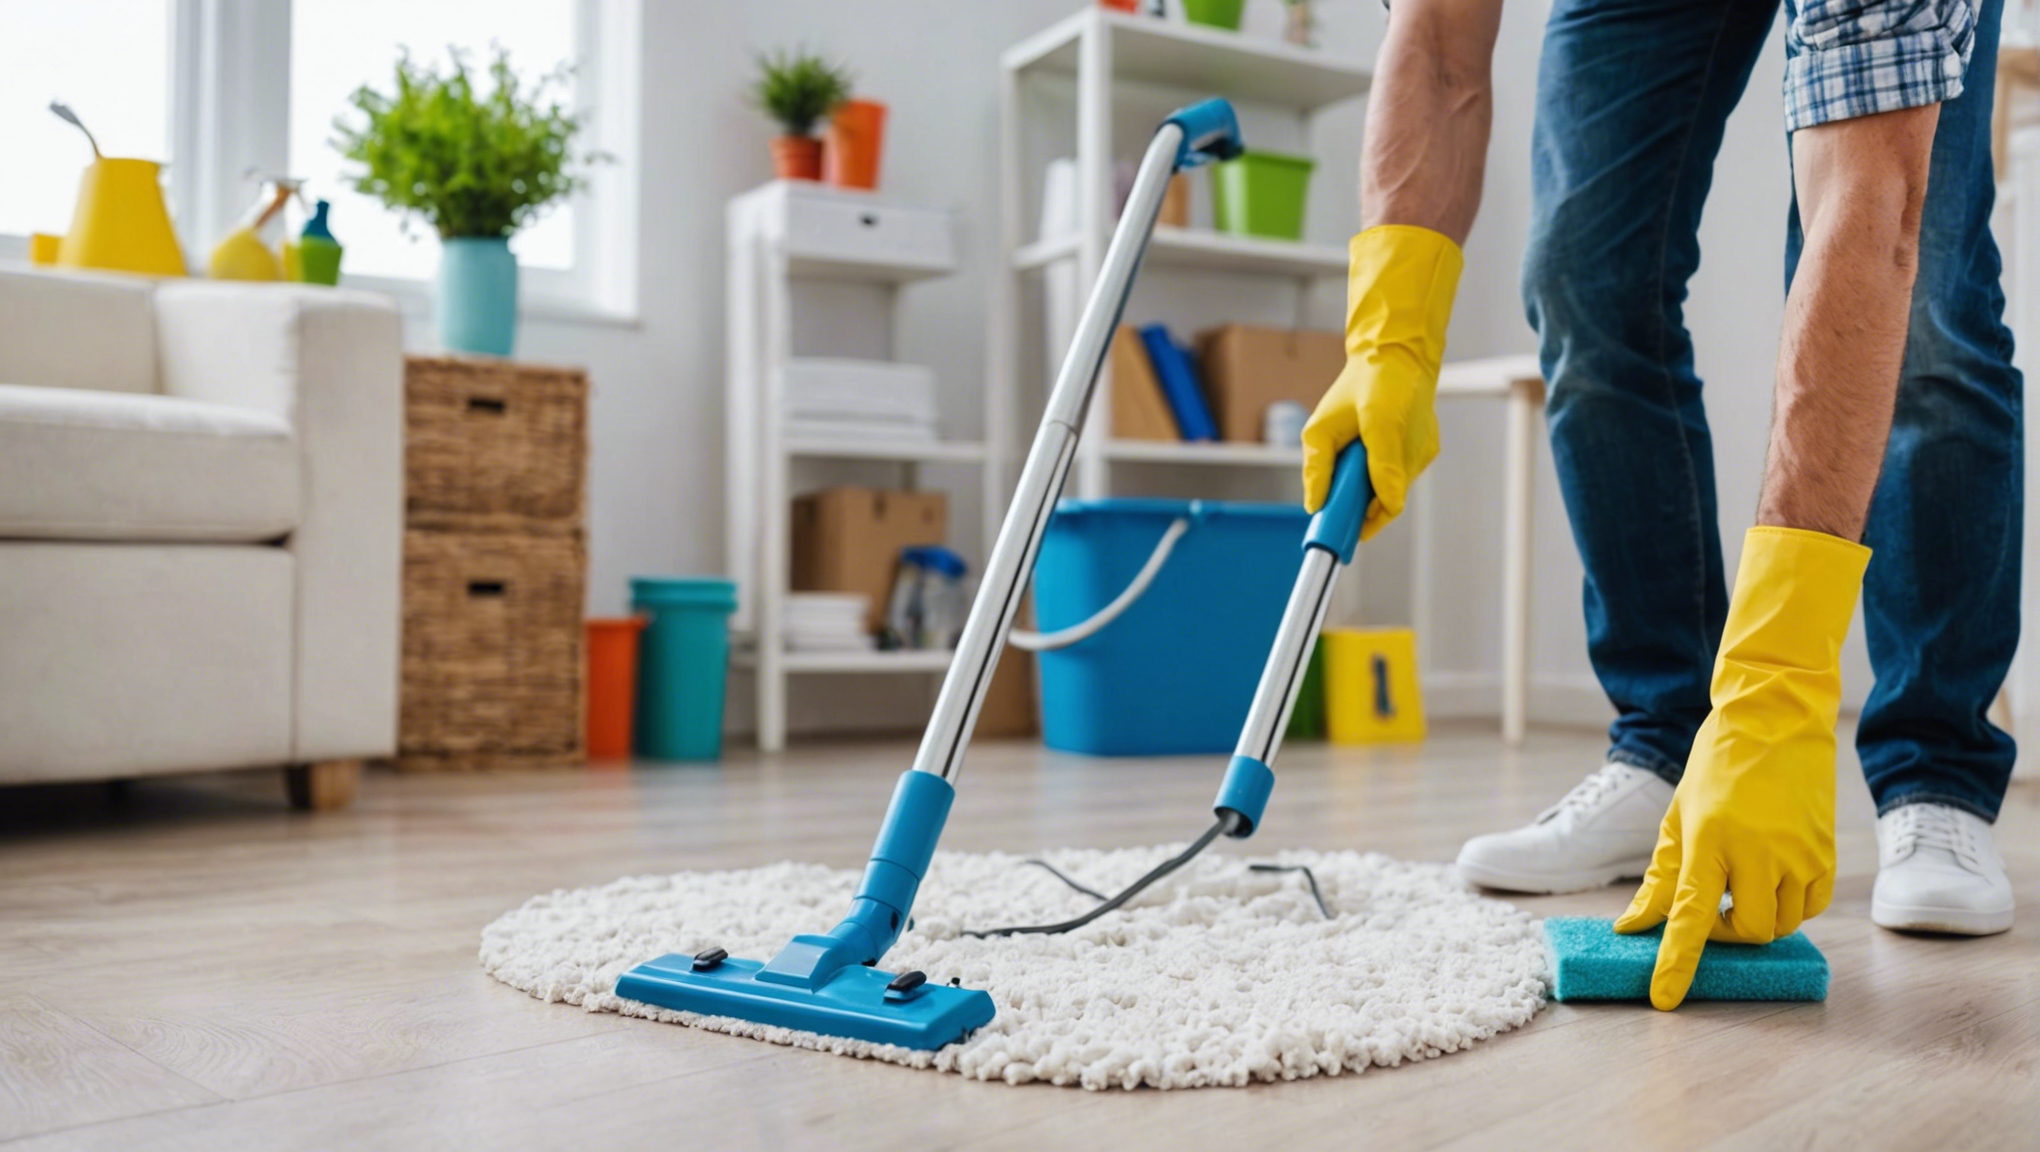 learn top 10 spring cleaning tips to keep pests at bay and maintain a pest-free home with expert advice and practical strategies.